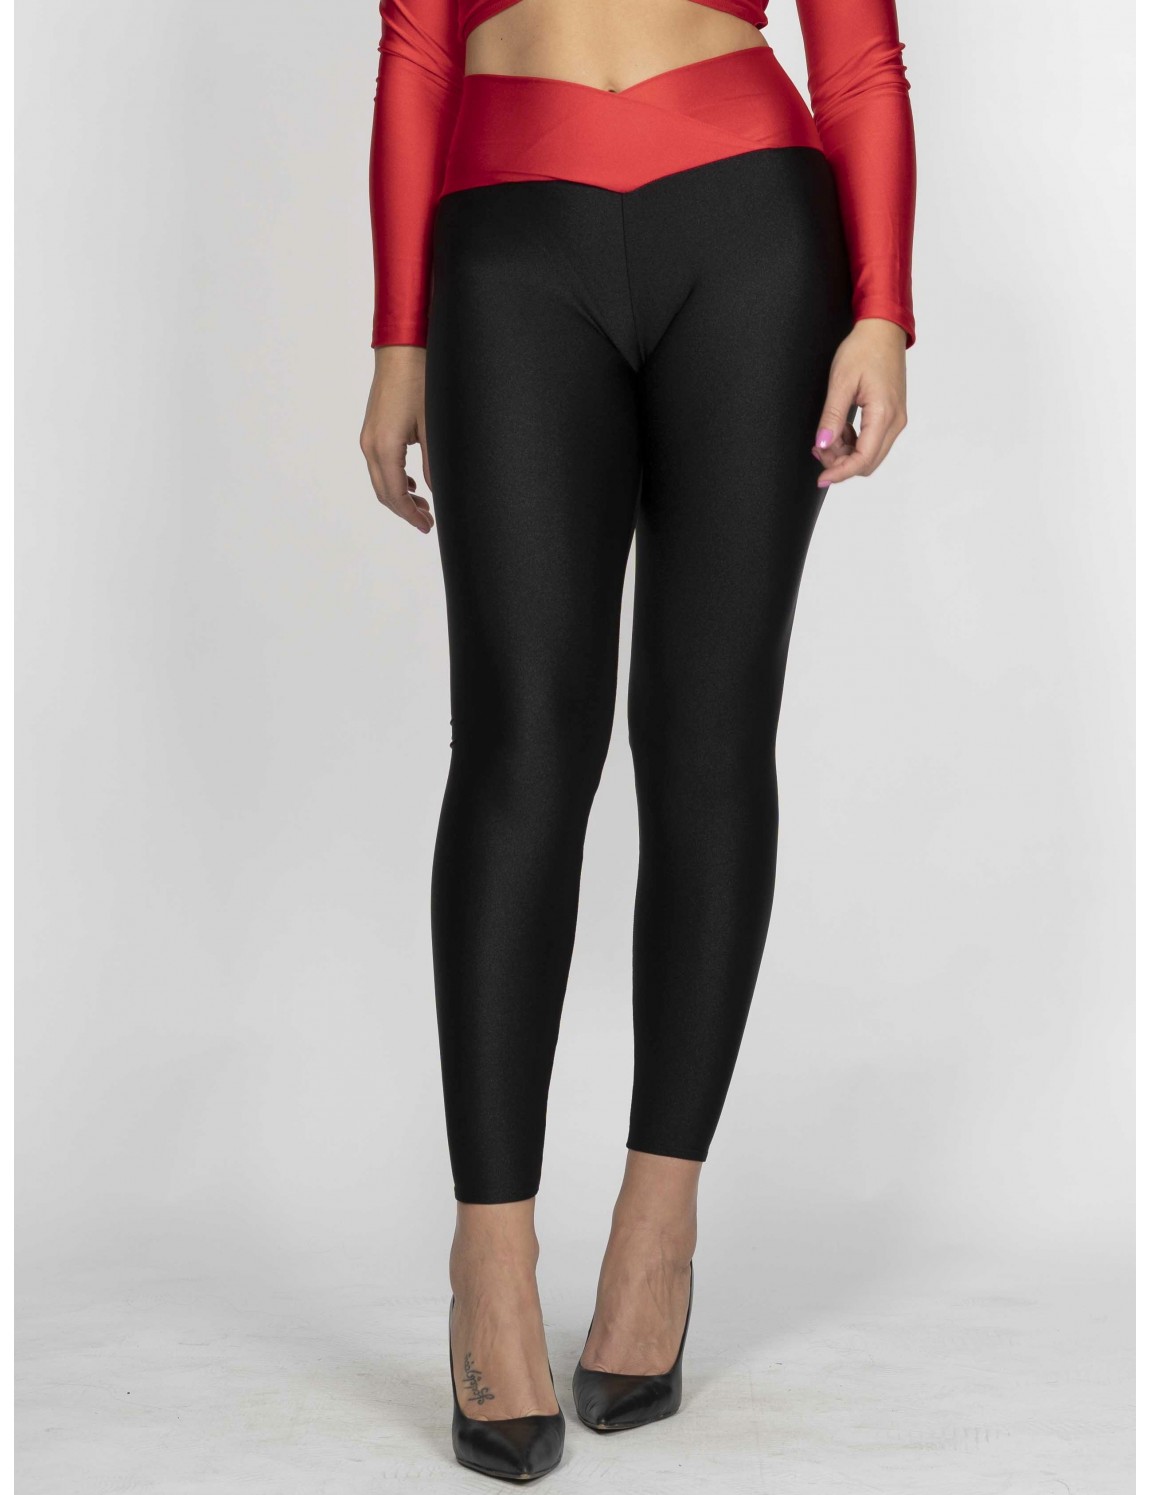 Exclusive lycra legging Paris model special for night and dance.